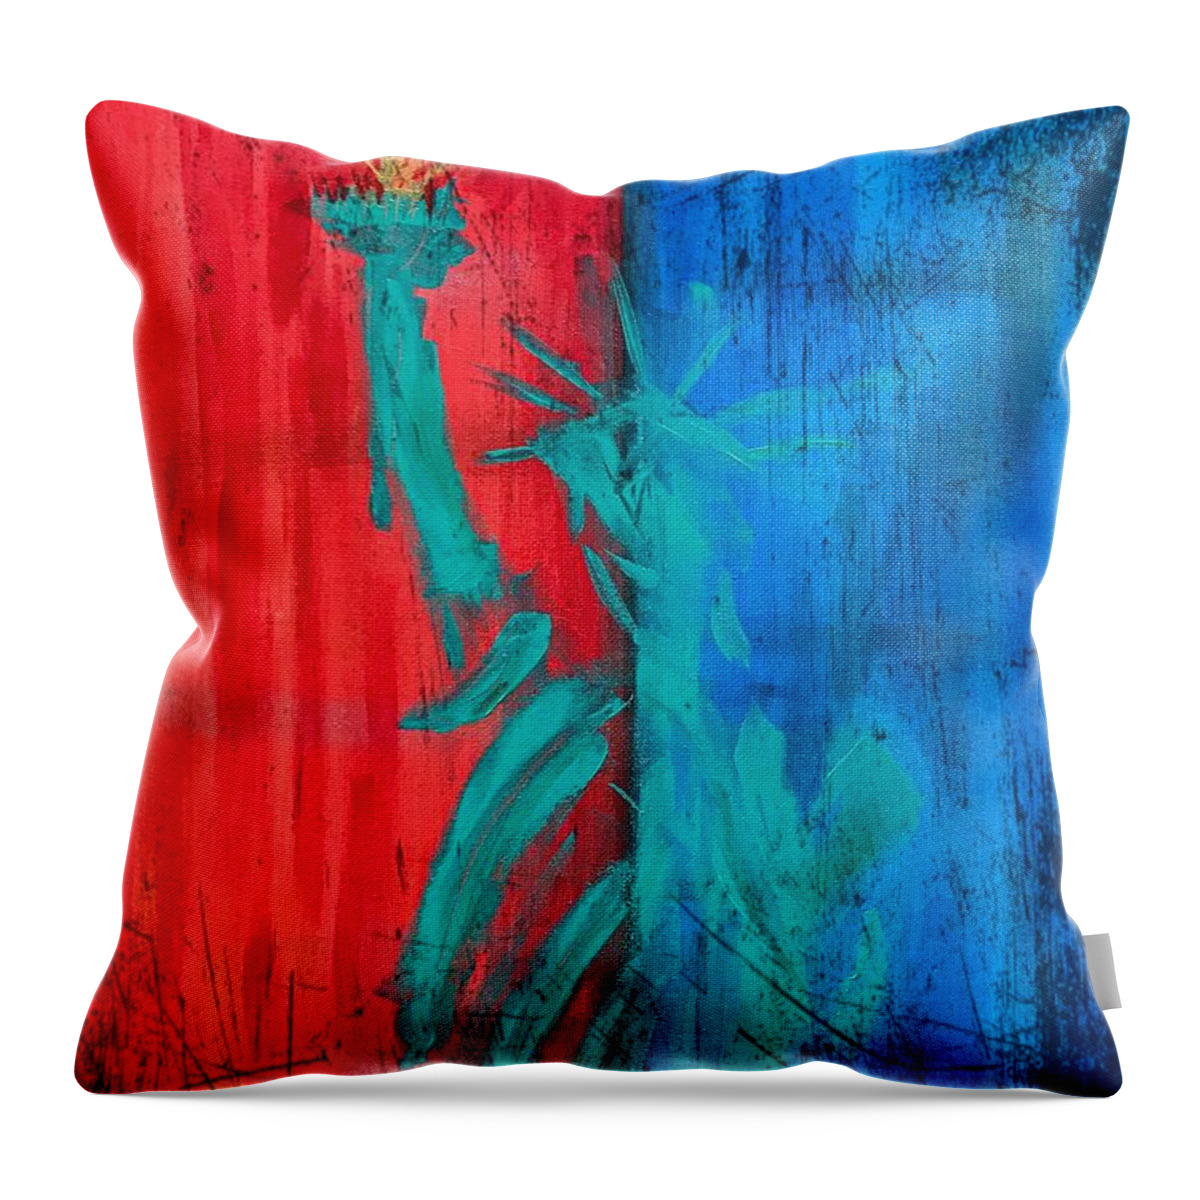 Statue Of Liberty Throw Pillow featuring the painting Lady Liberty I by Jason Nicholas